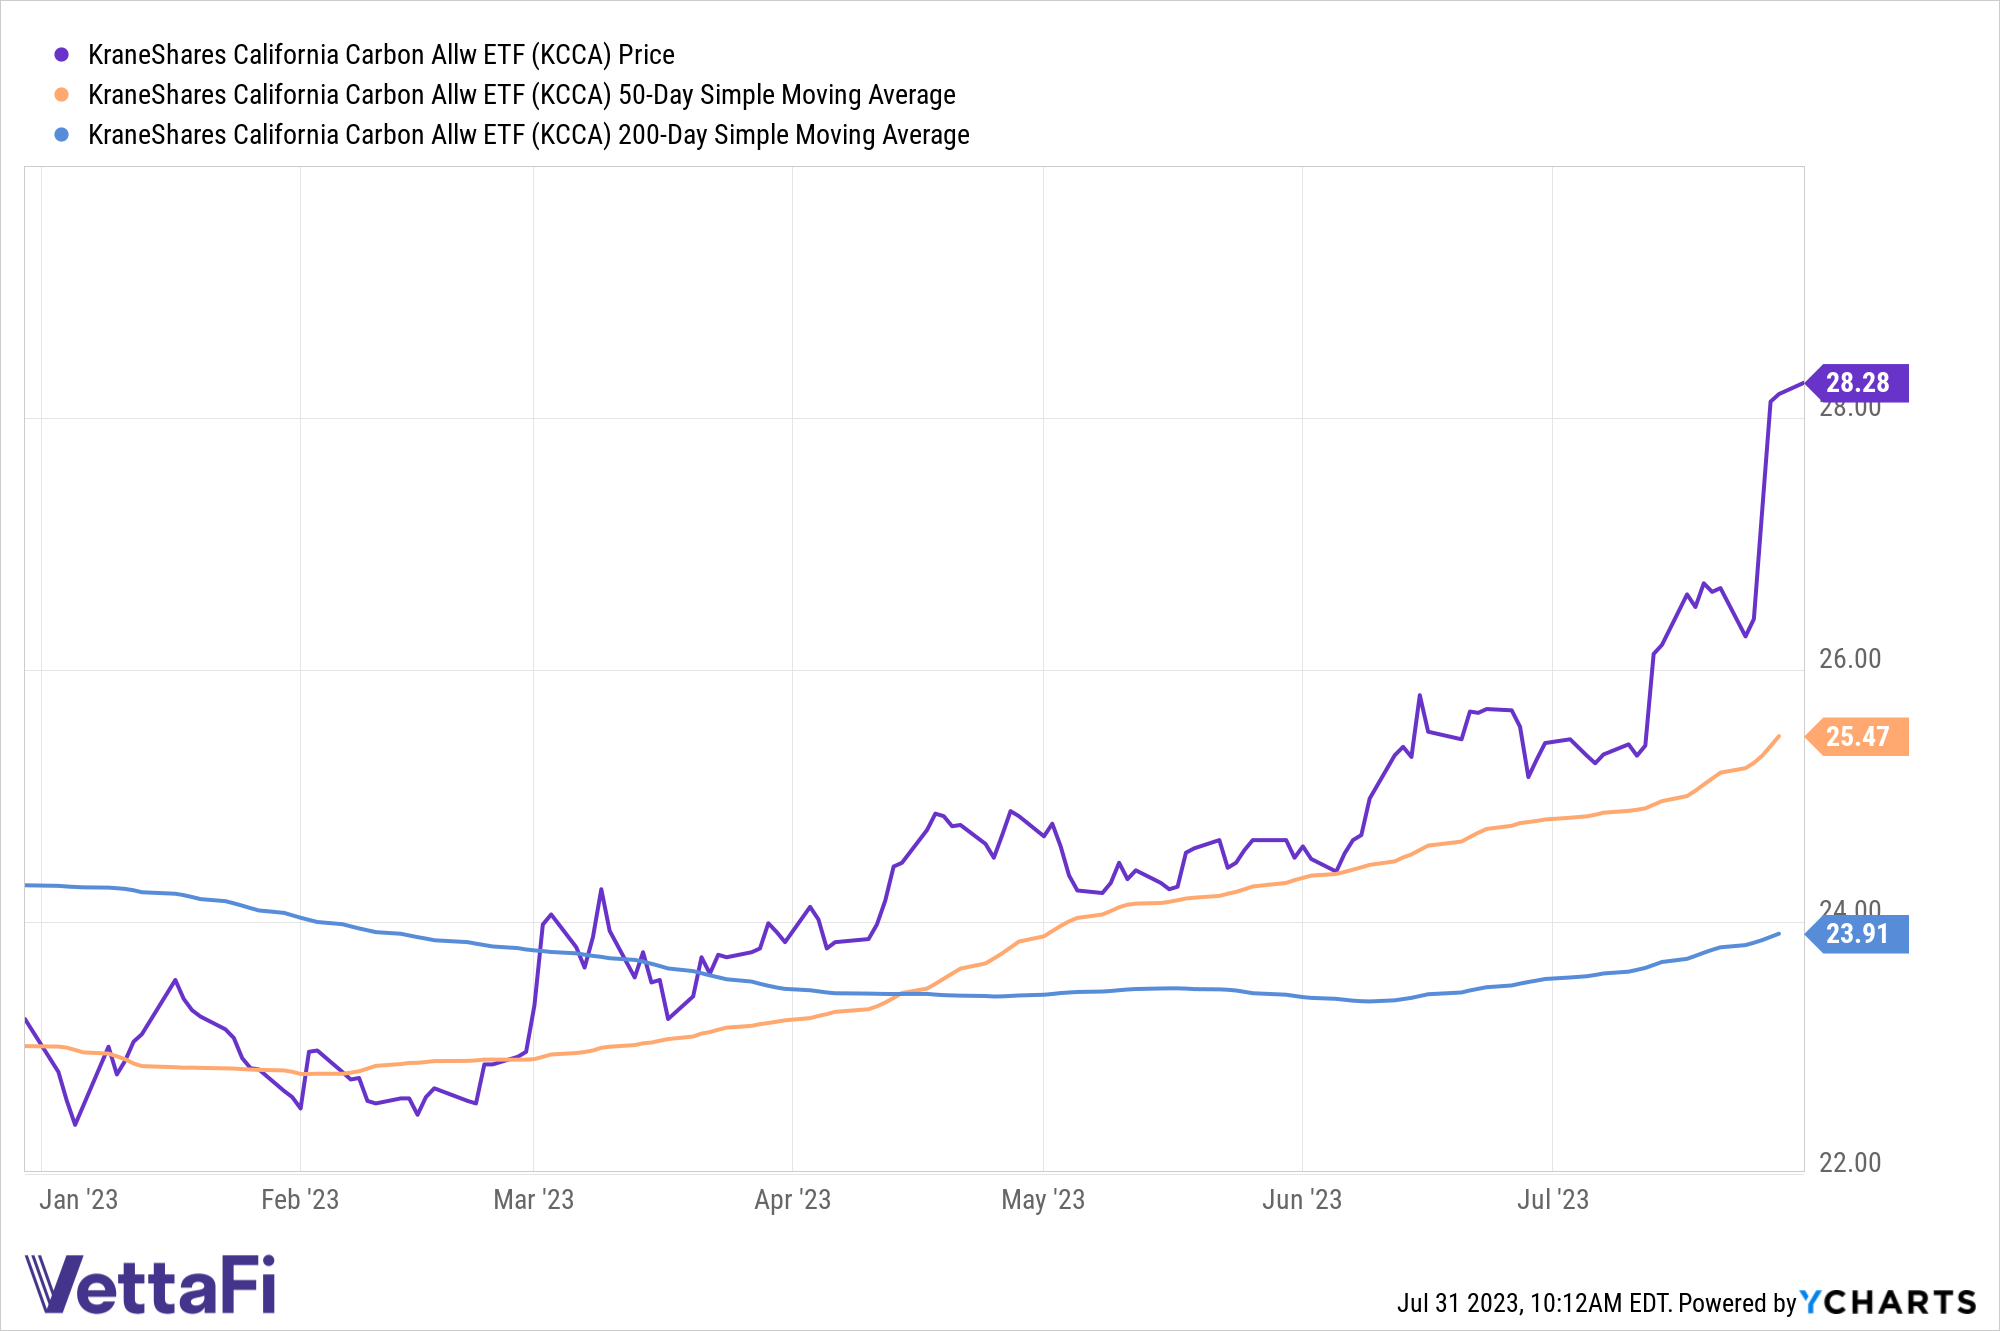 Price returns of KCCA YTD, currently at 28.28 as of July 31 and significantly above its 50-day SMA of 25.47 and its 200-day SMA of 23.91. 